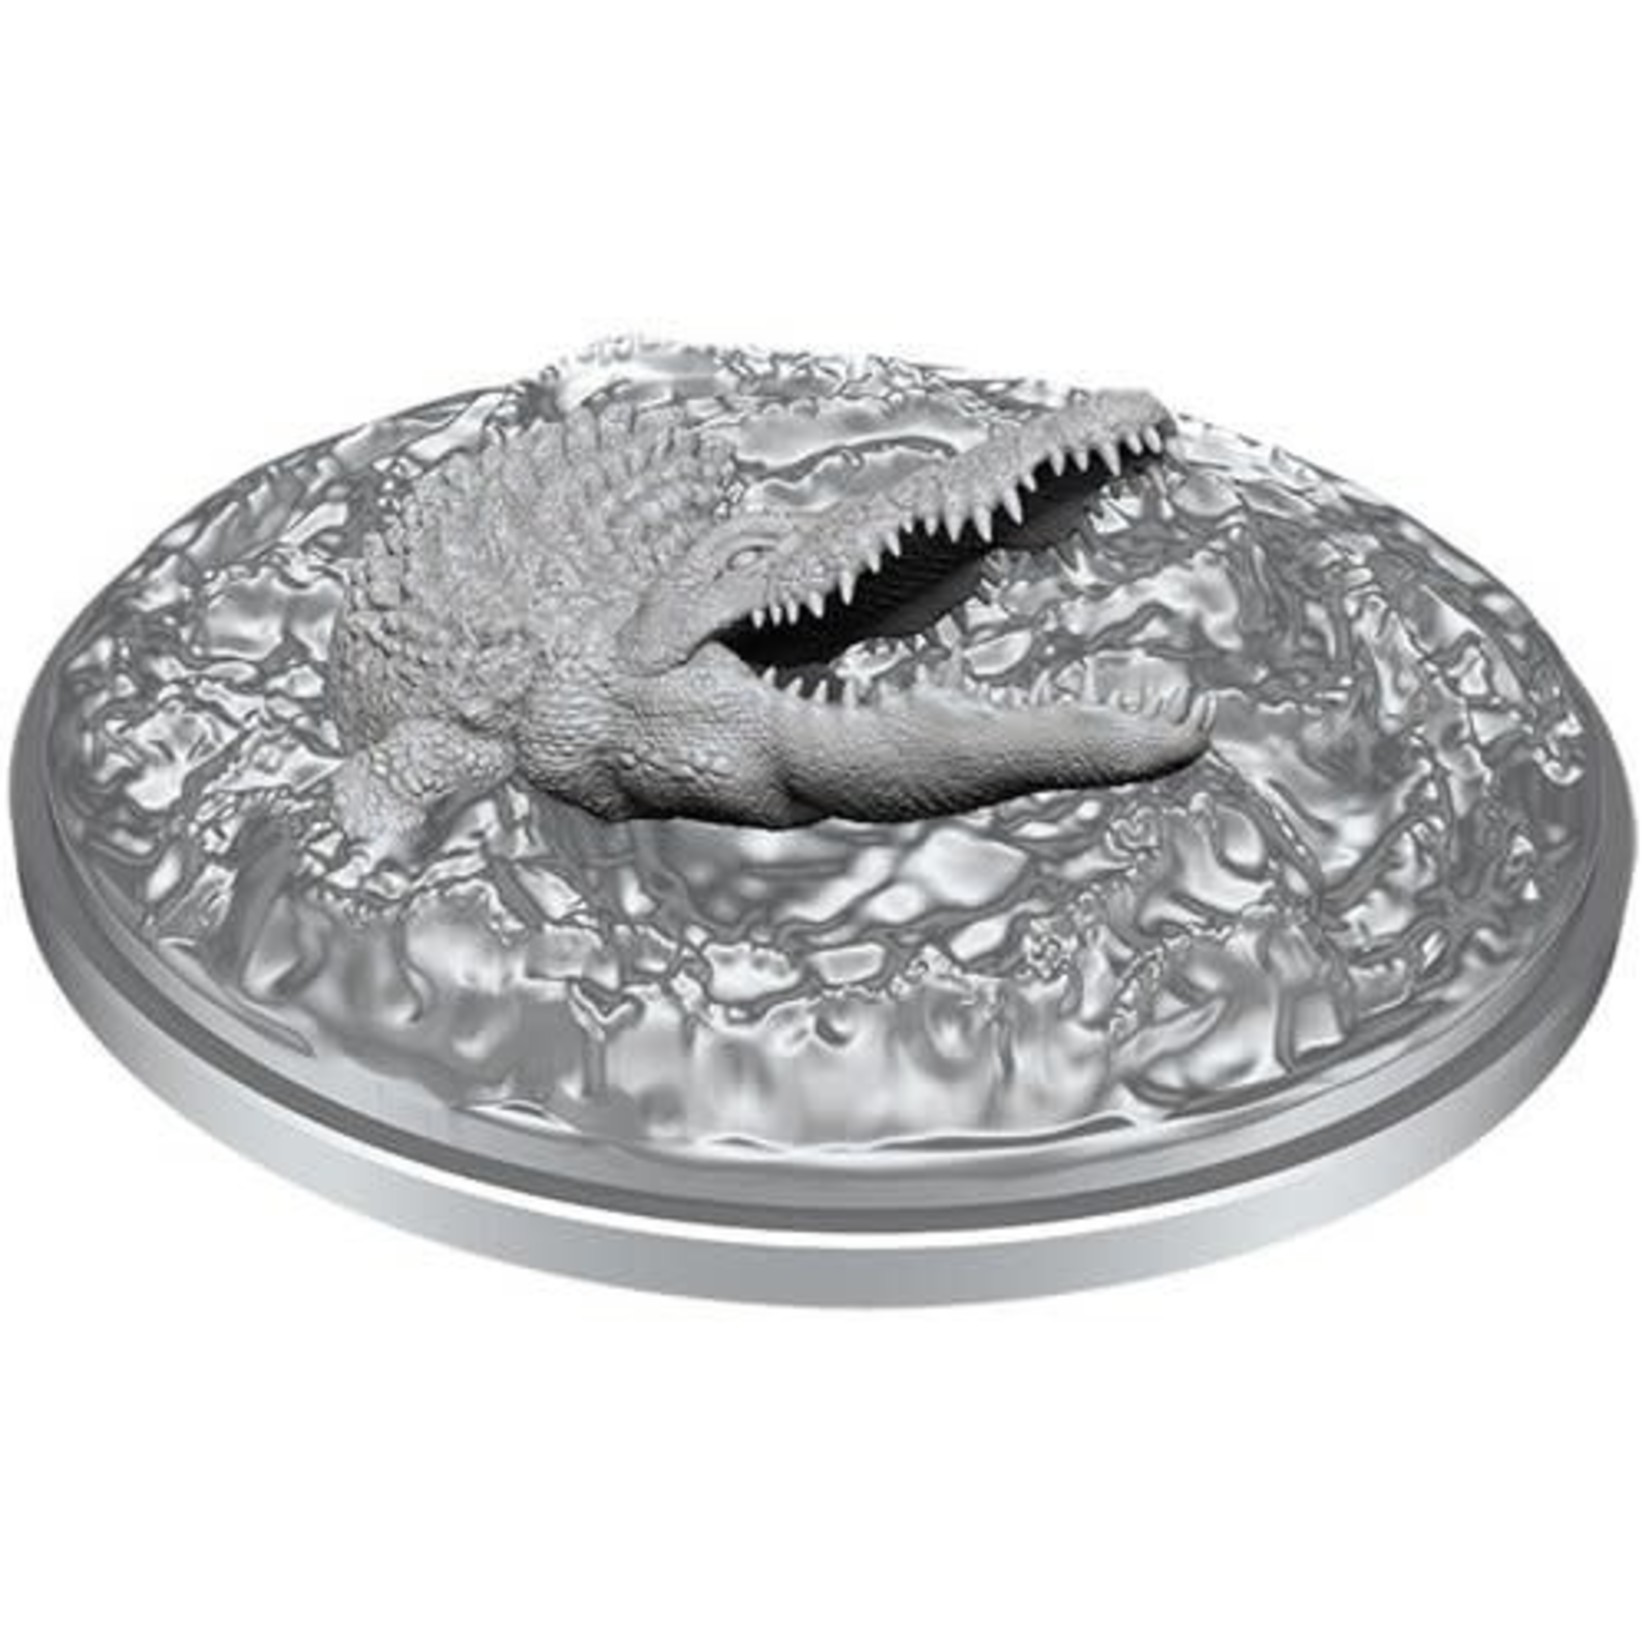 WizKids Dungeons and Dragons Nolzur's Marvelous Minis Crocodile